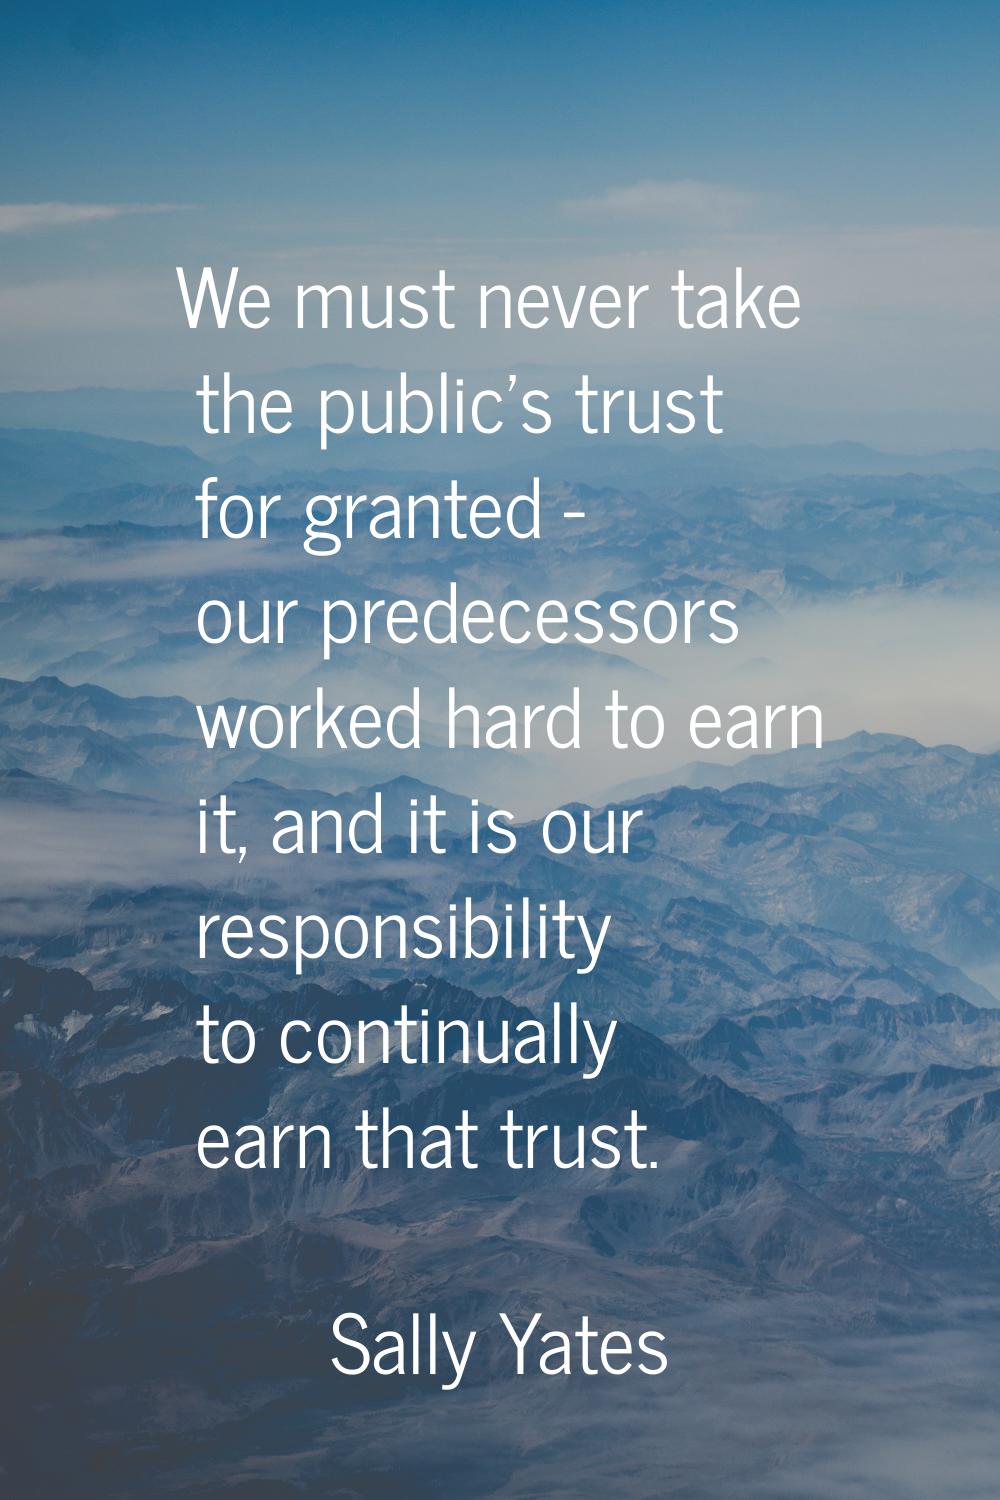 We must never take the public's trust for granted - our predecessors worked hard to earn it, and it